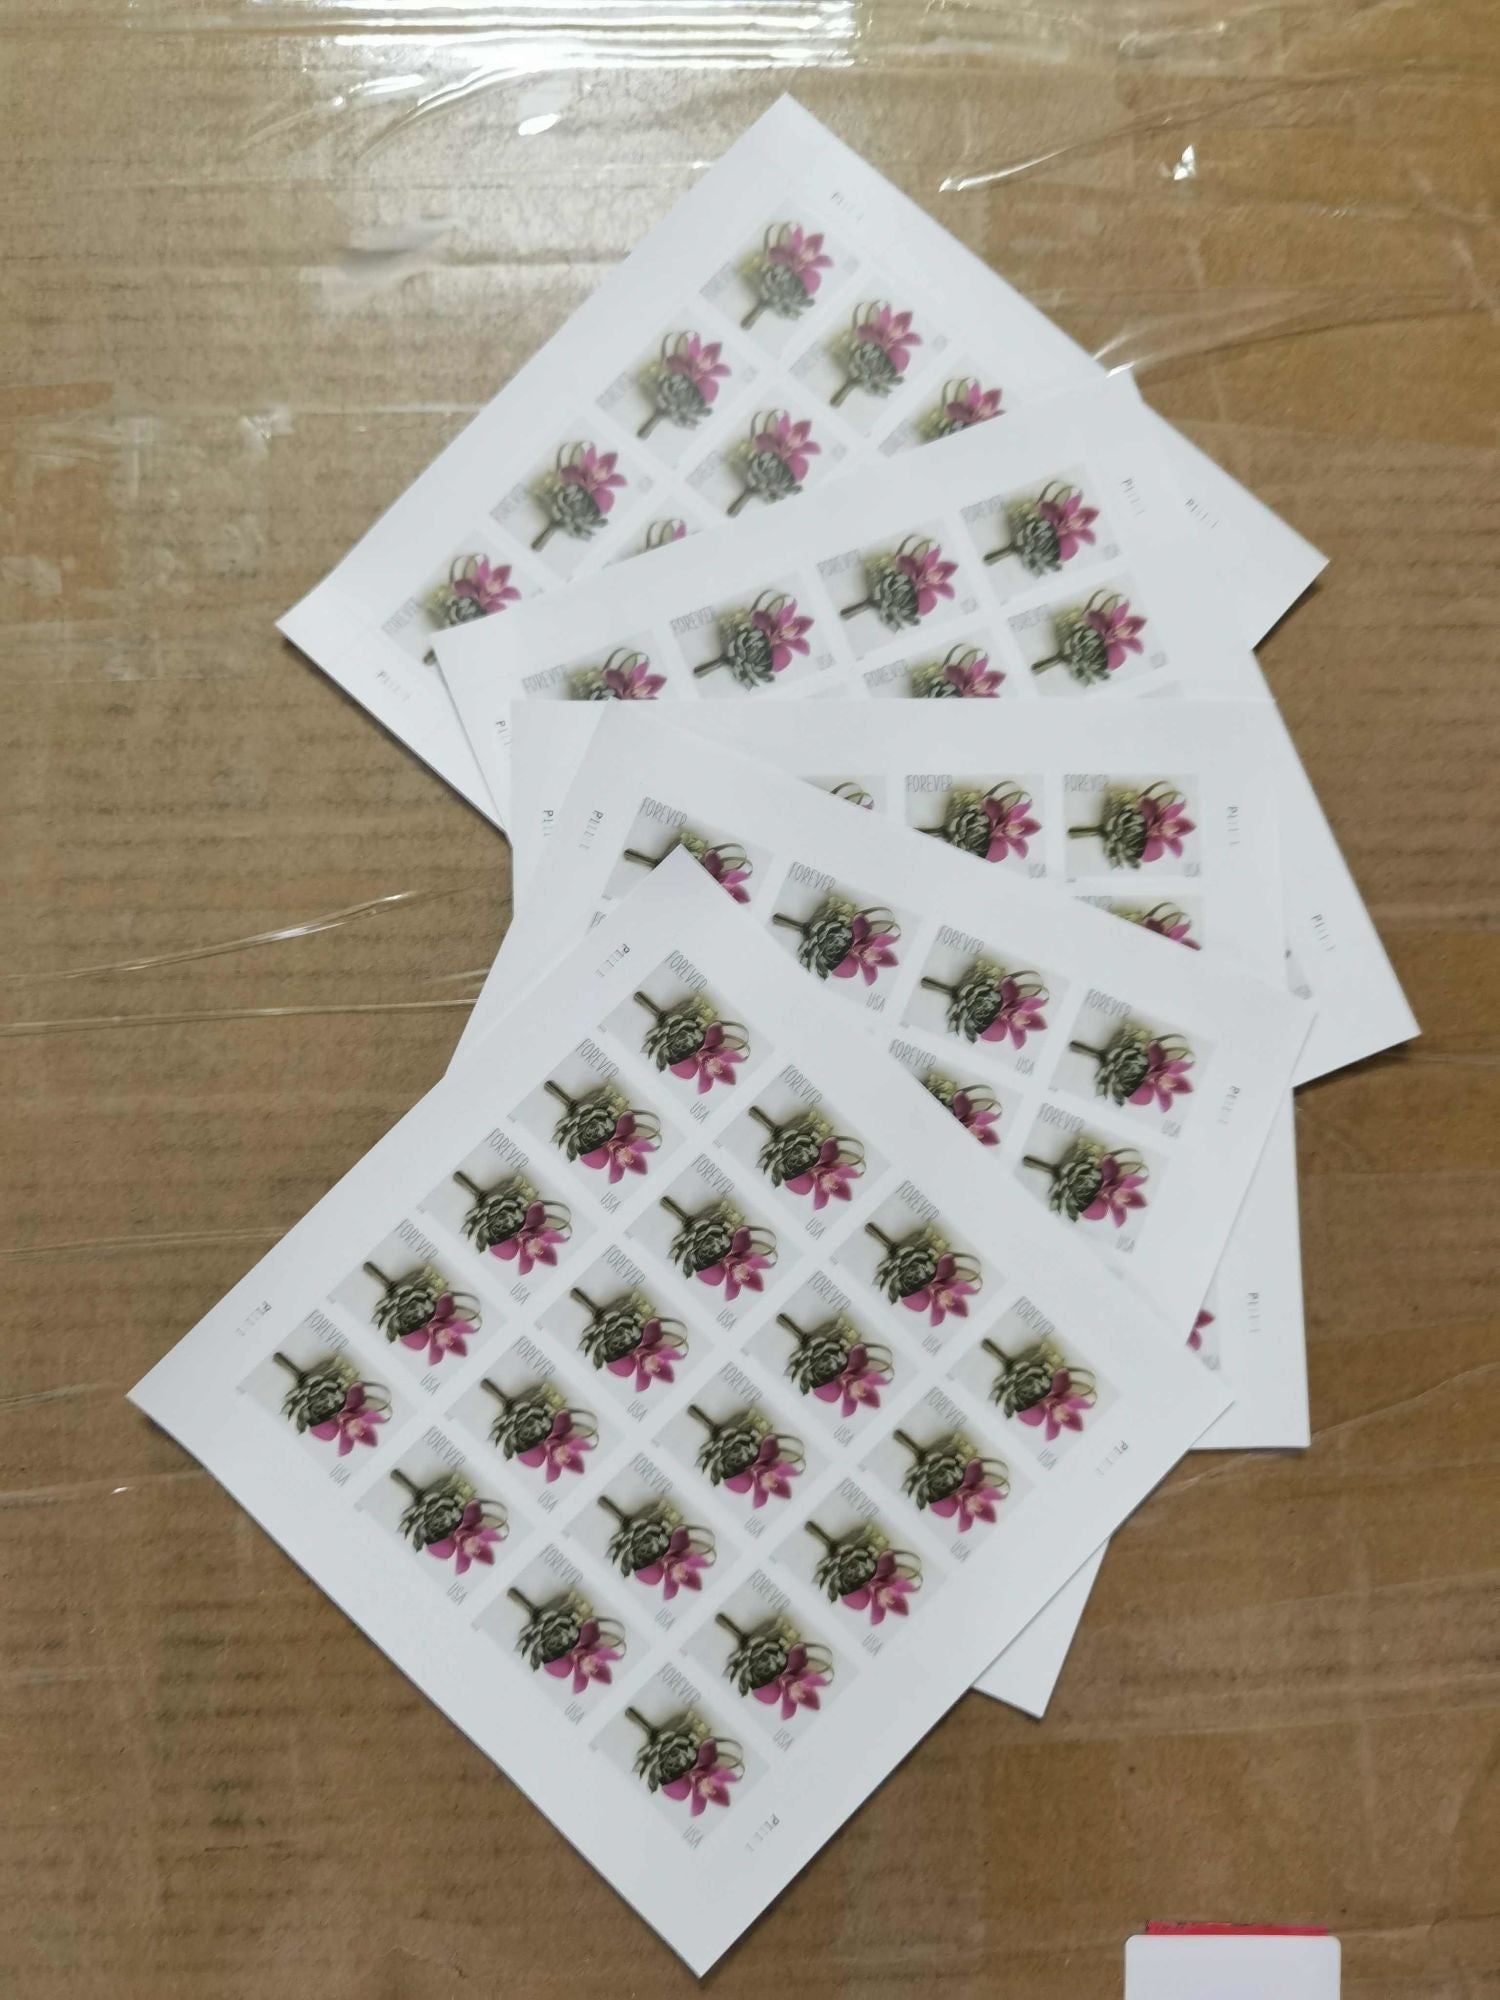 A sheet of First-Class Rate 2020 U.S. STAMPS featuring a contemporary boutonniere design, placed on a cardboard surface.